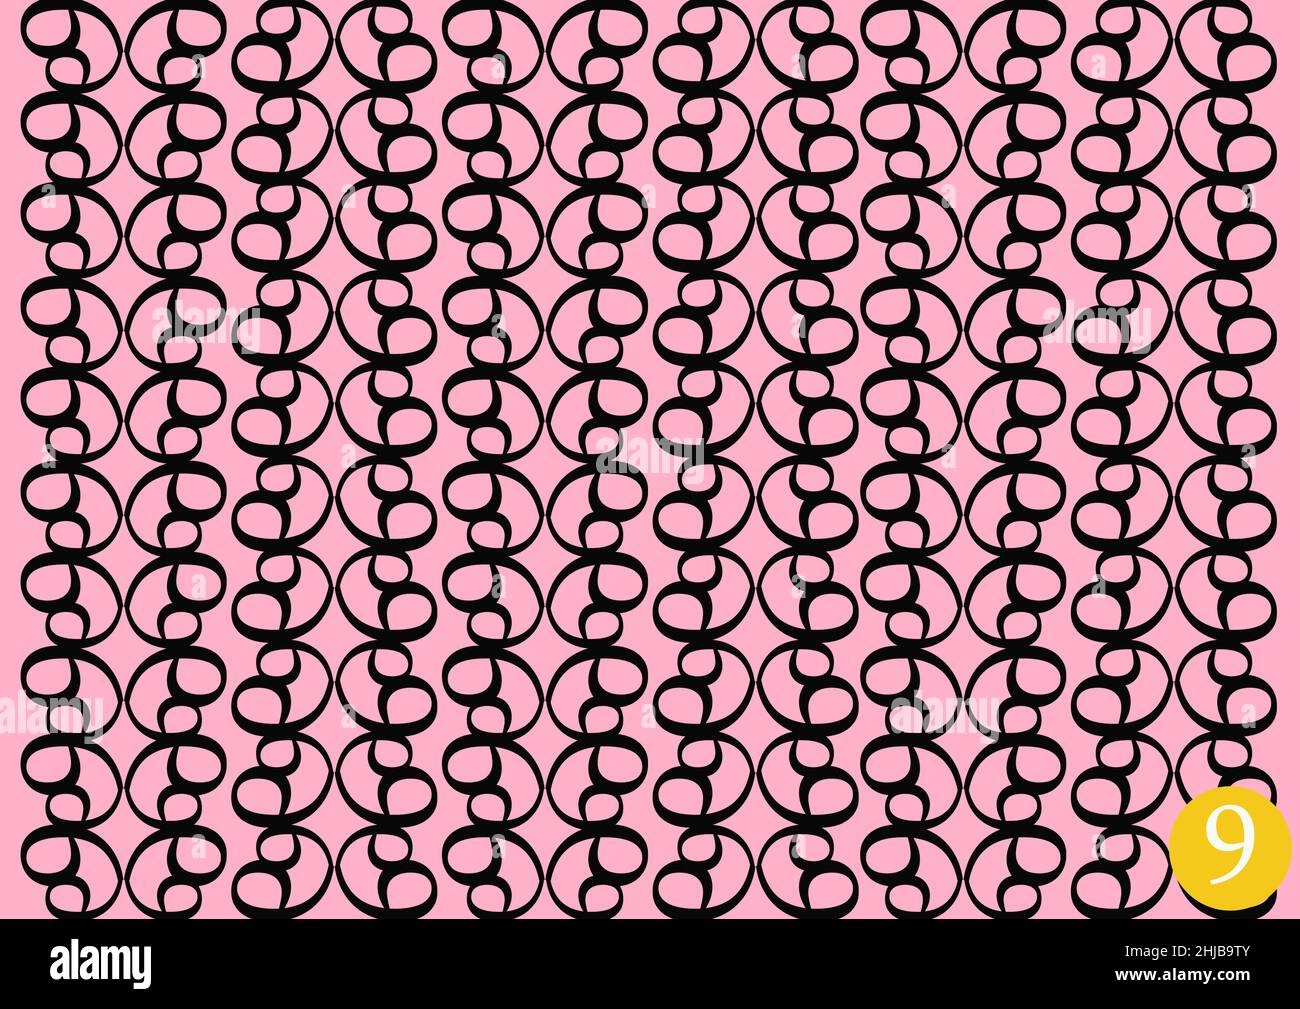 A pattern made from number for wallpaper and decoration Stock Photo - Alamy